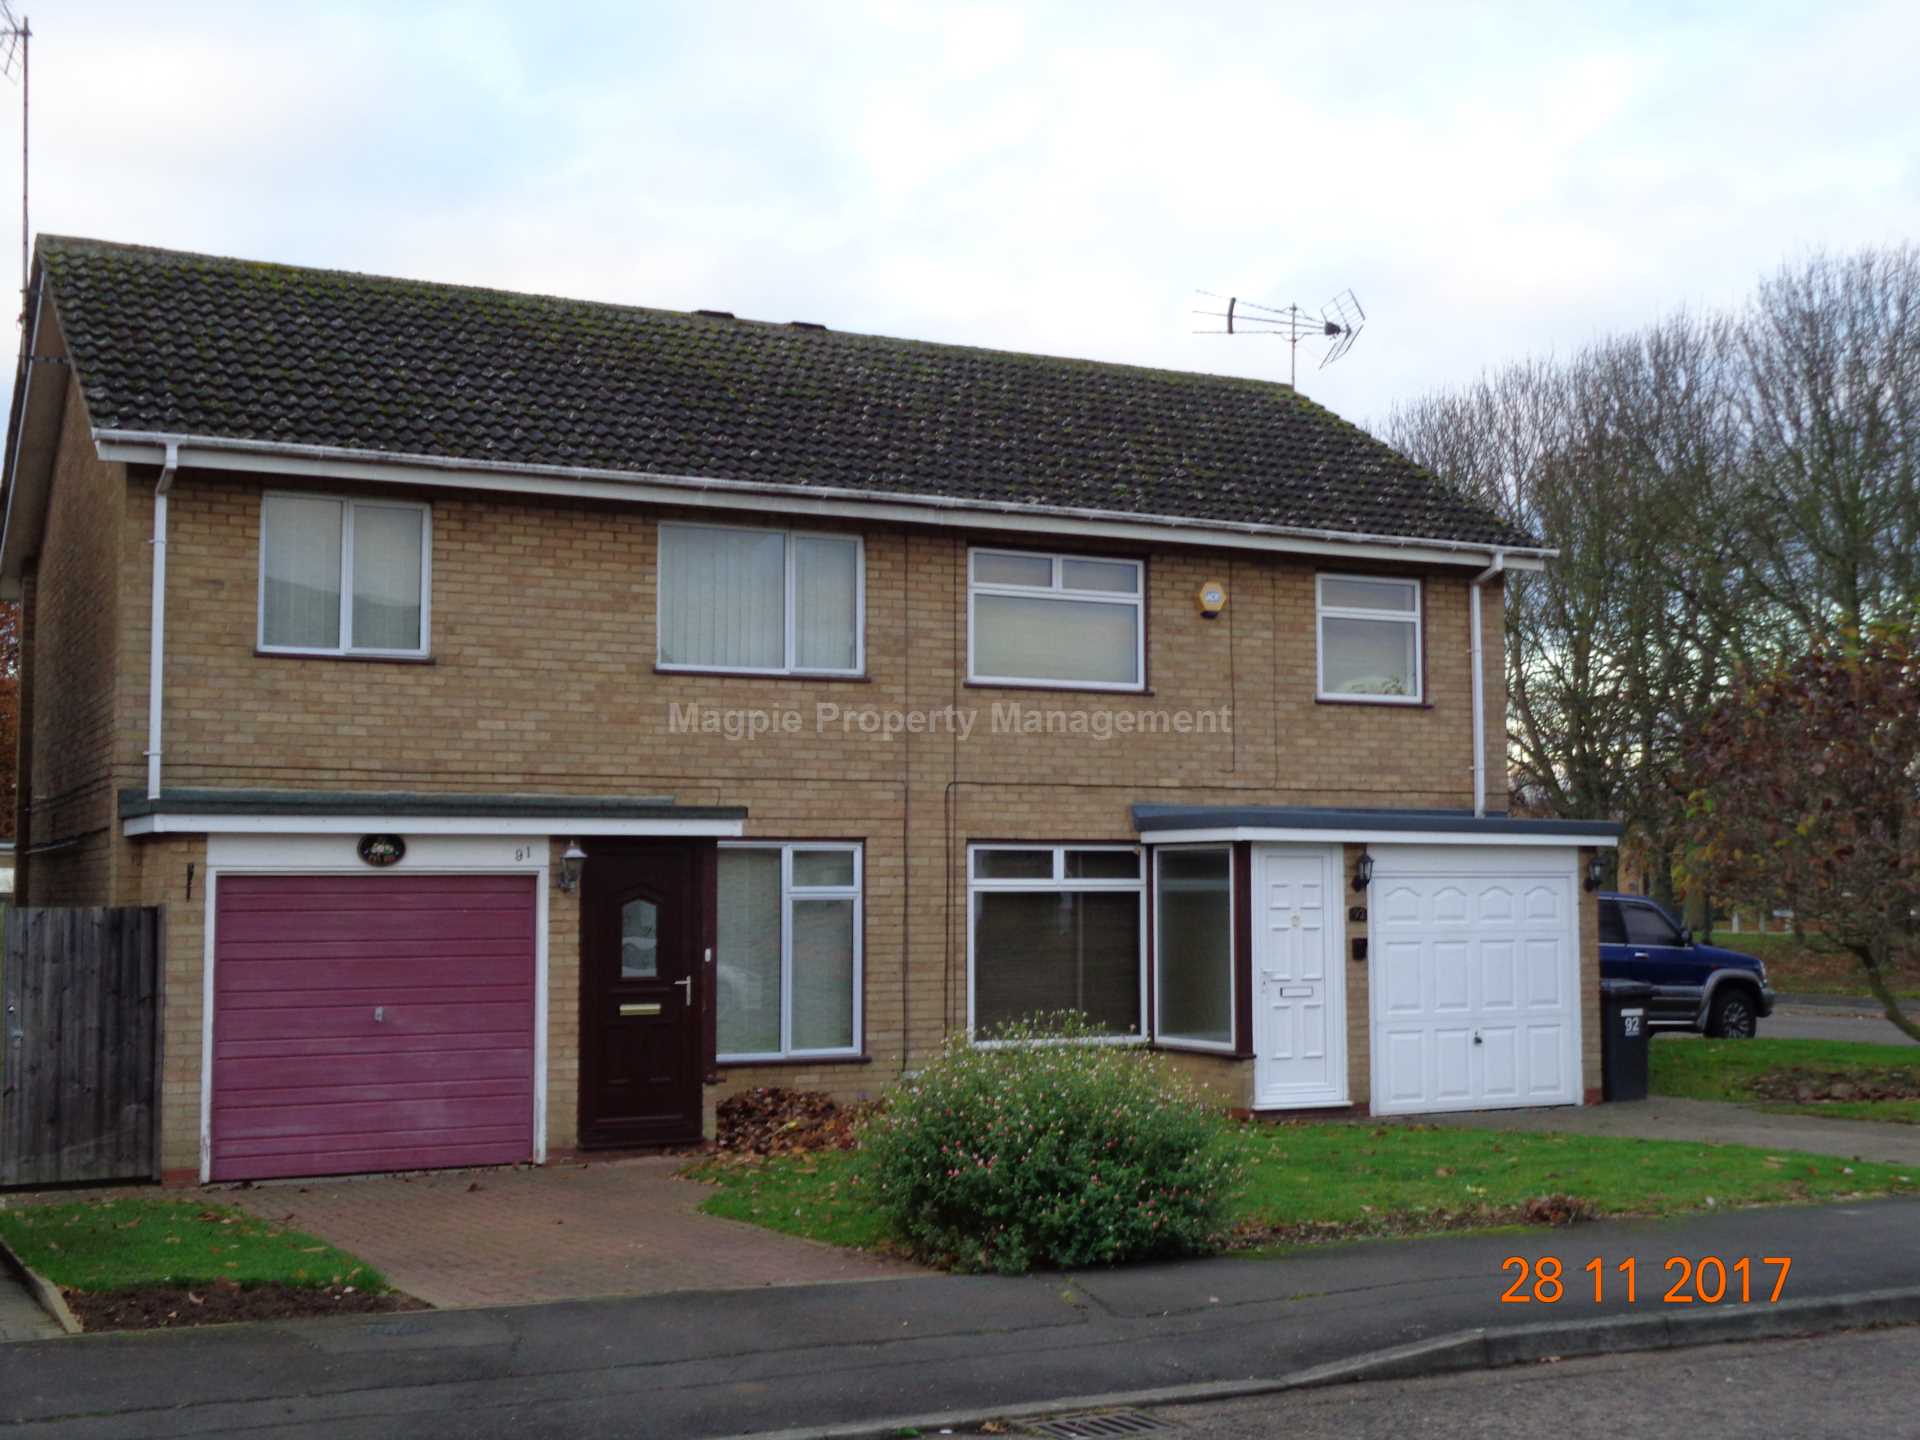 3 bed Semi-Detached House for rent in Peterborough. From Magpie Property Management - St Neots